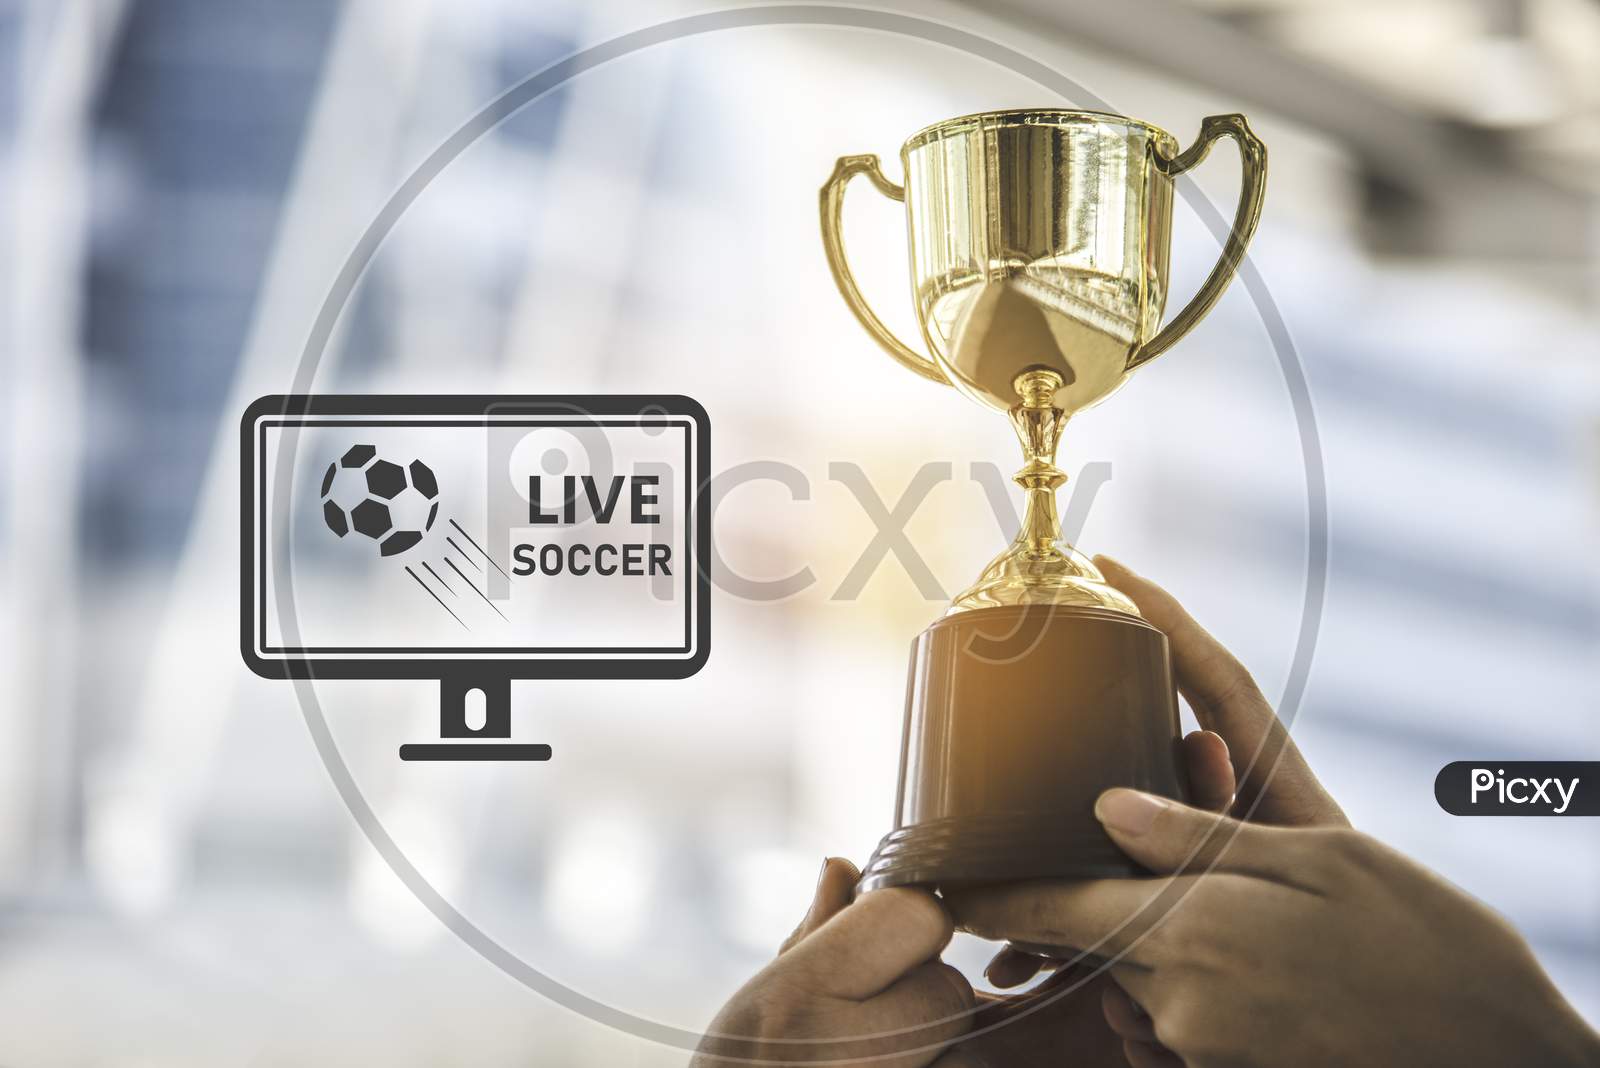 Champion Golden Trophy For Winner Background With Live Soccer Screen Icon On Right. Success And Achievement Concept. Sport And Cup Award Theme. Television Broadcast Theme.